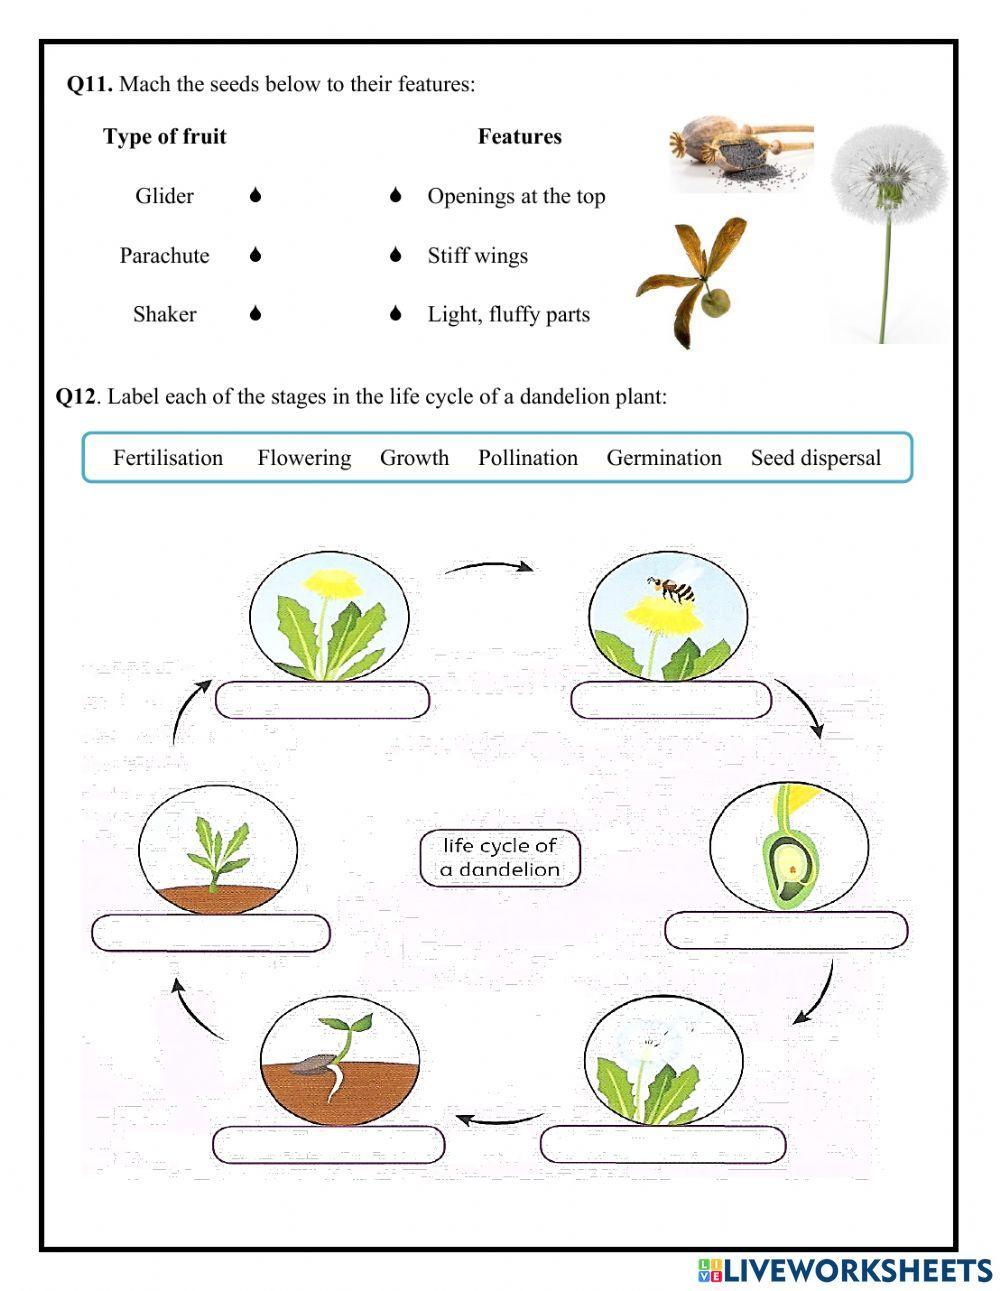 life cycle of a flowering plant